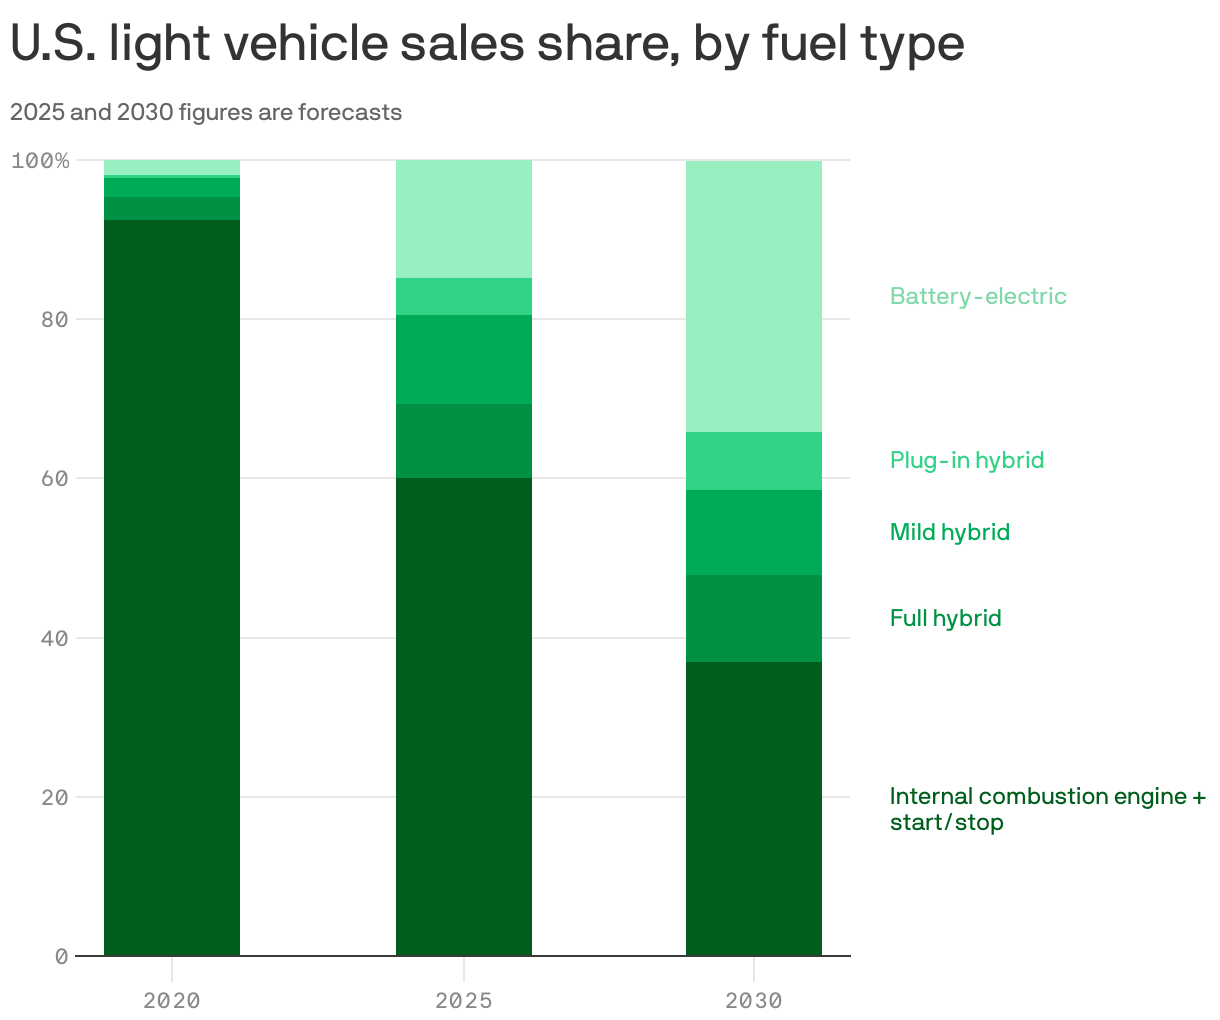 U.S. light vehicle sales share, by fuel type